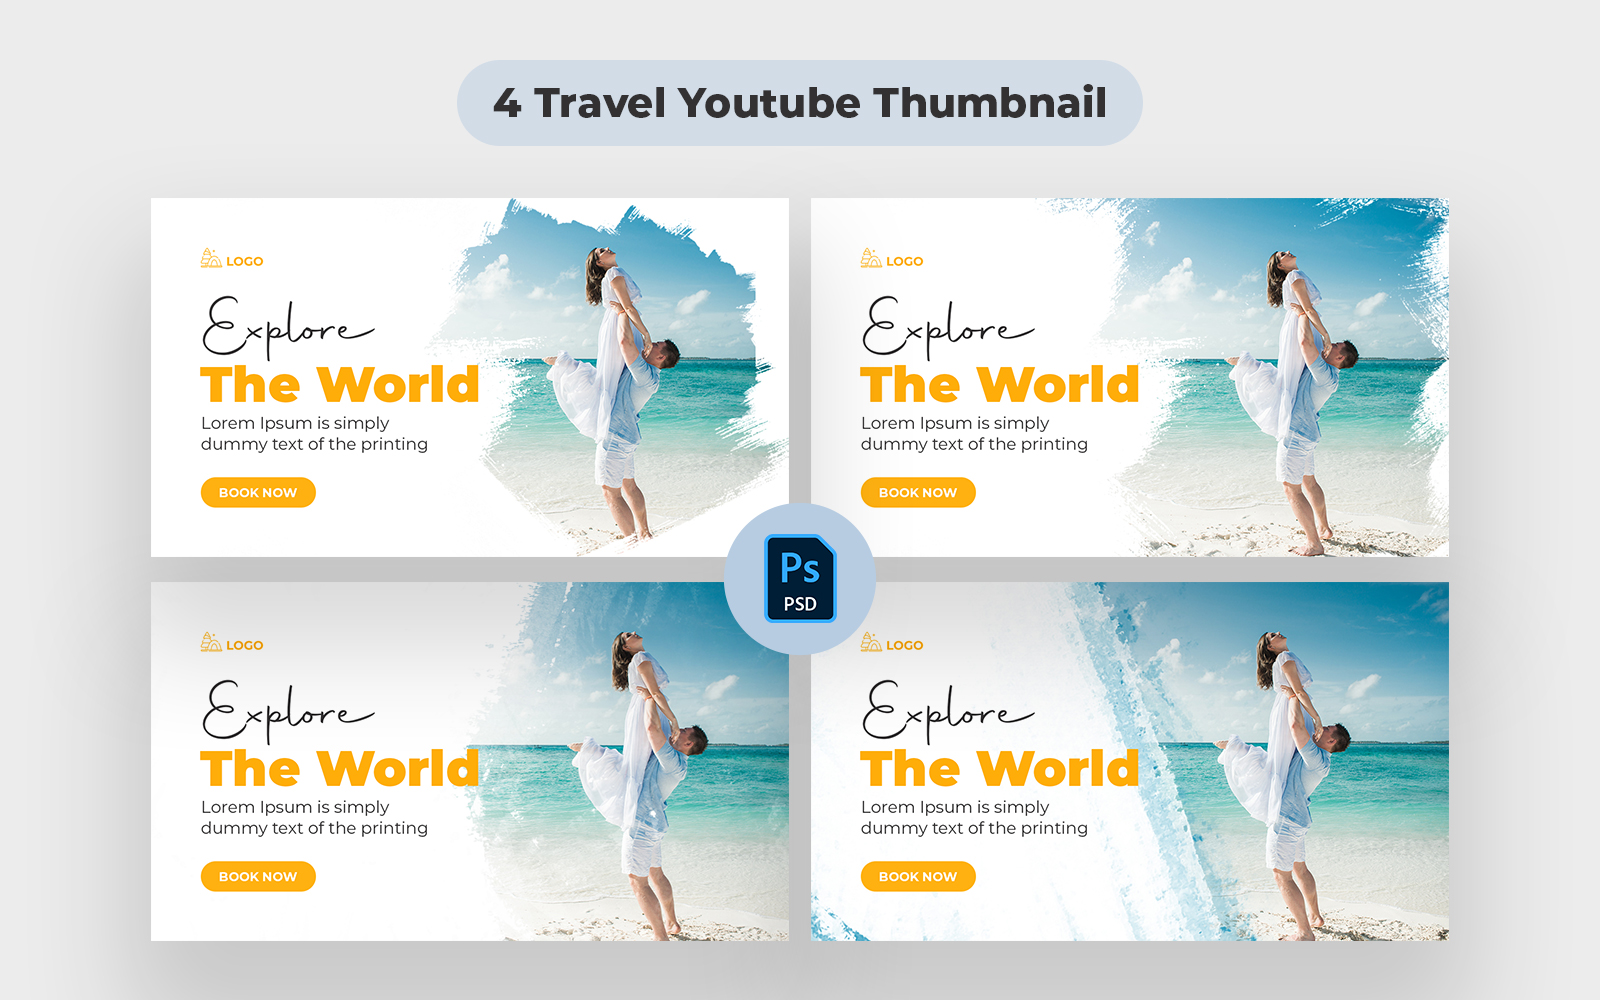 Template #293645 Travel Thumbnail Webdesign Template - Logo template Preview